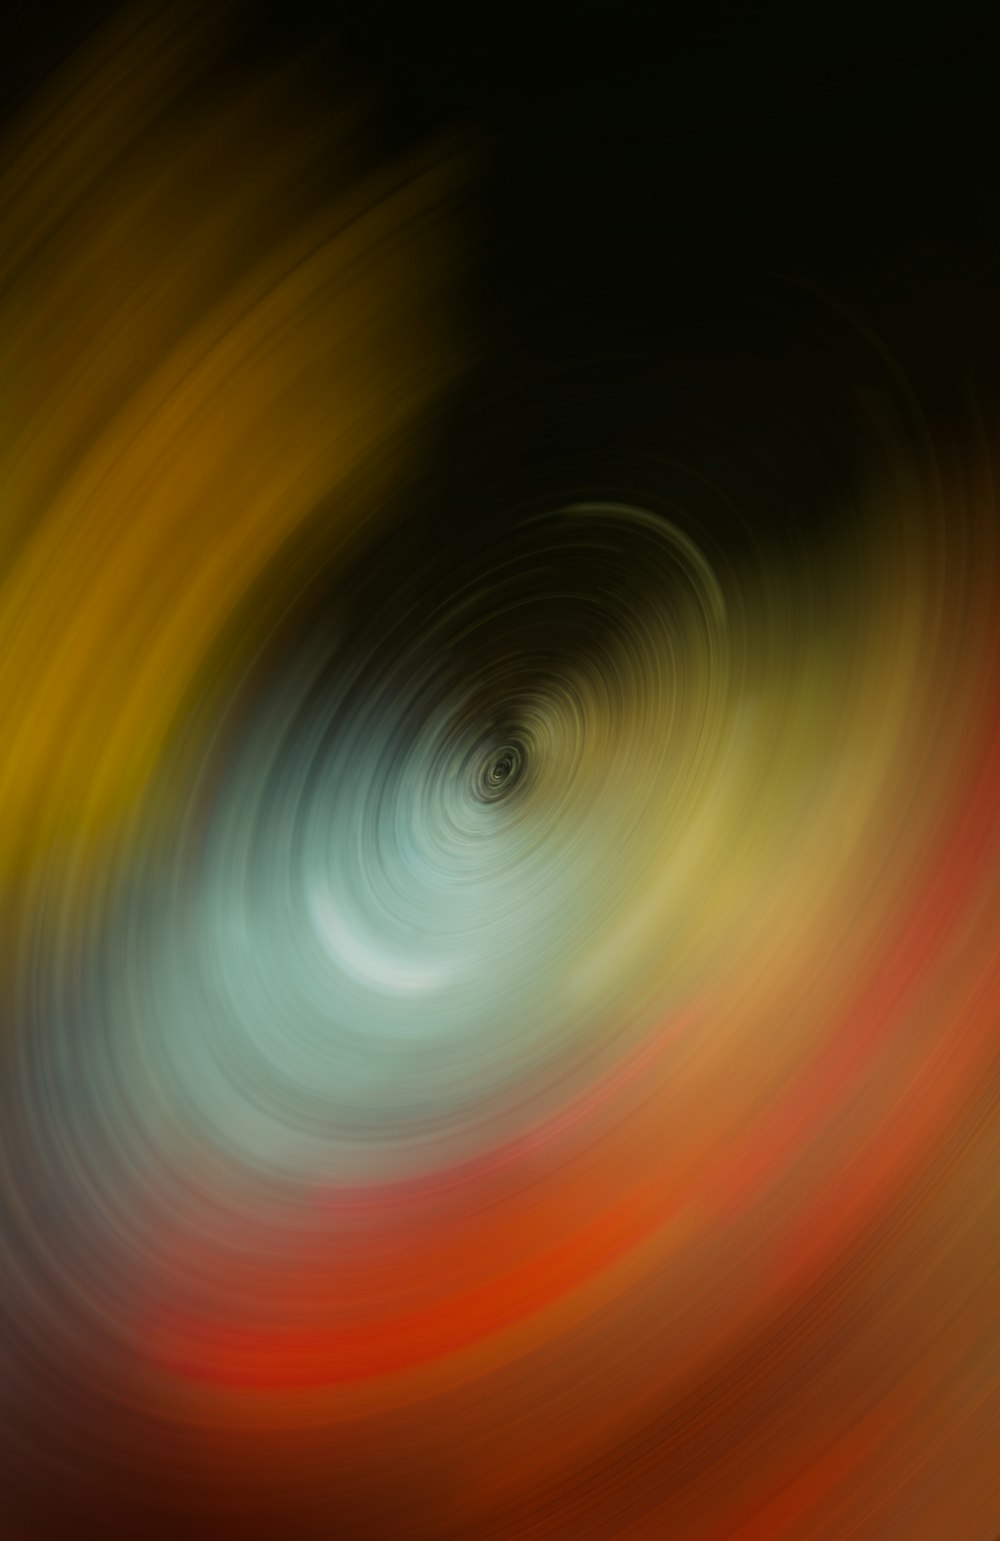 a blurry image of a circular object